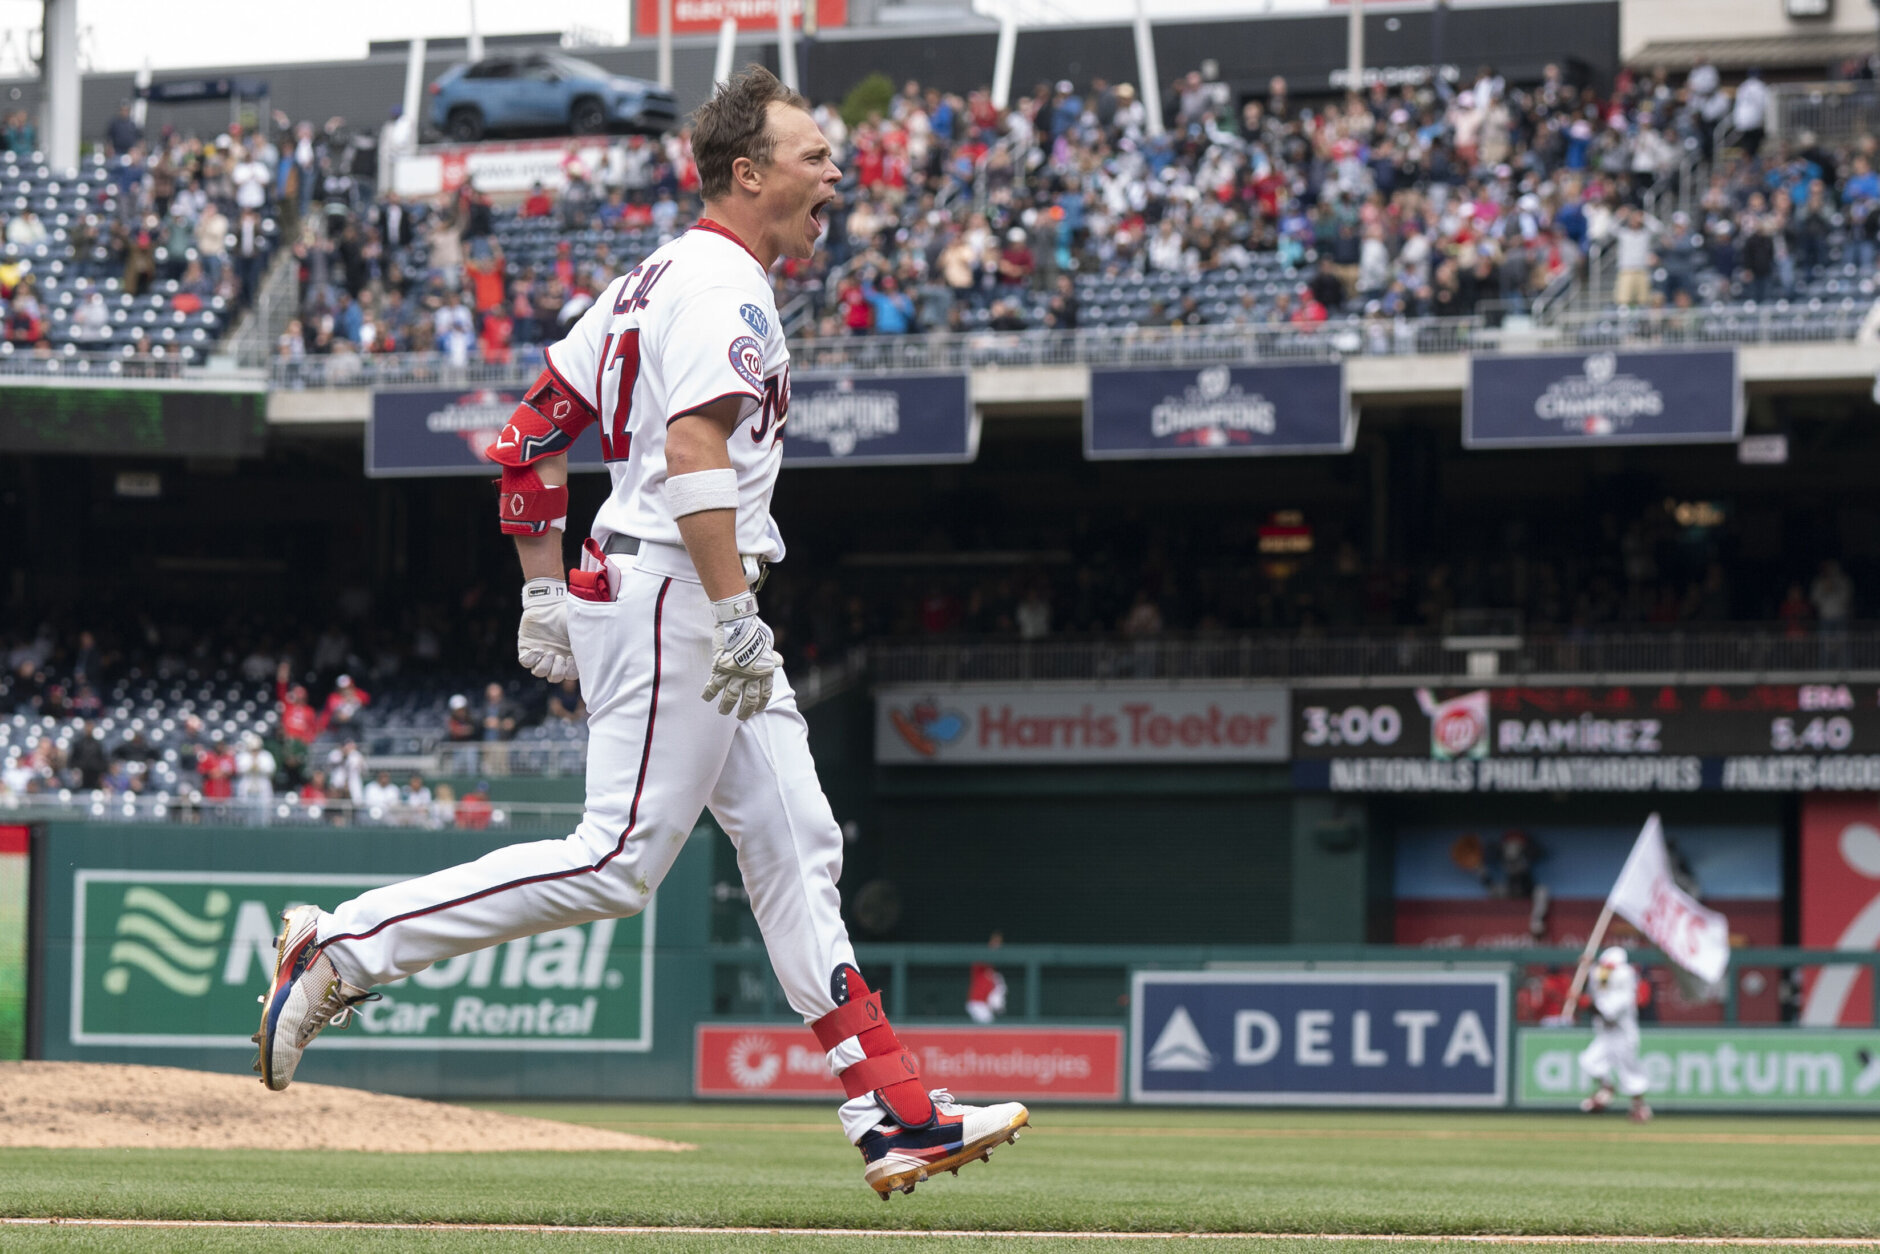 April 3, 2019: Mr. Walk-On wins it for Nationals with a walk-off walk –  Society for American Baseball Research